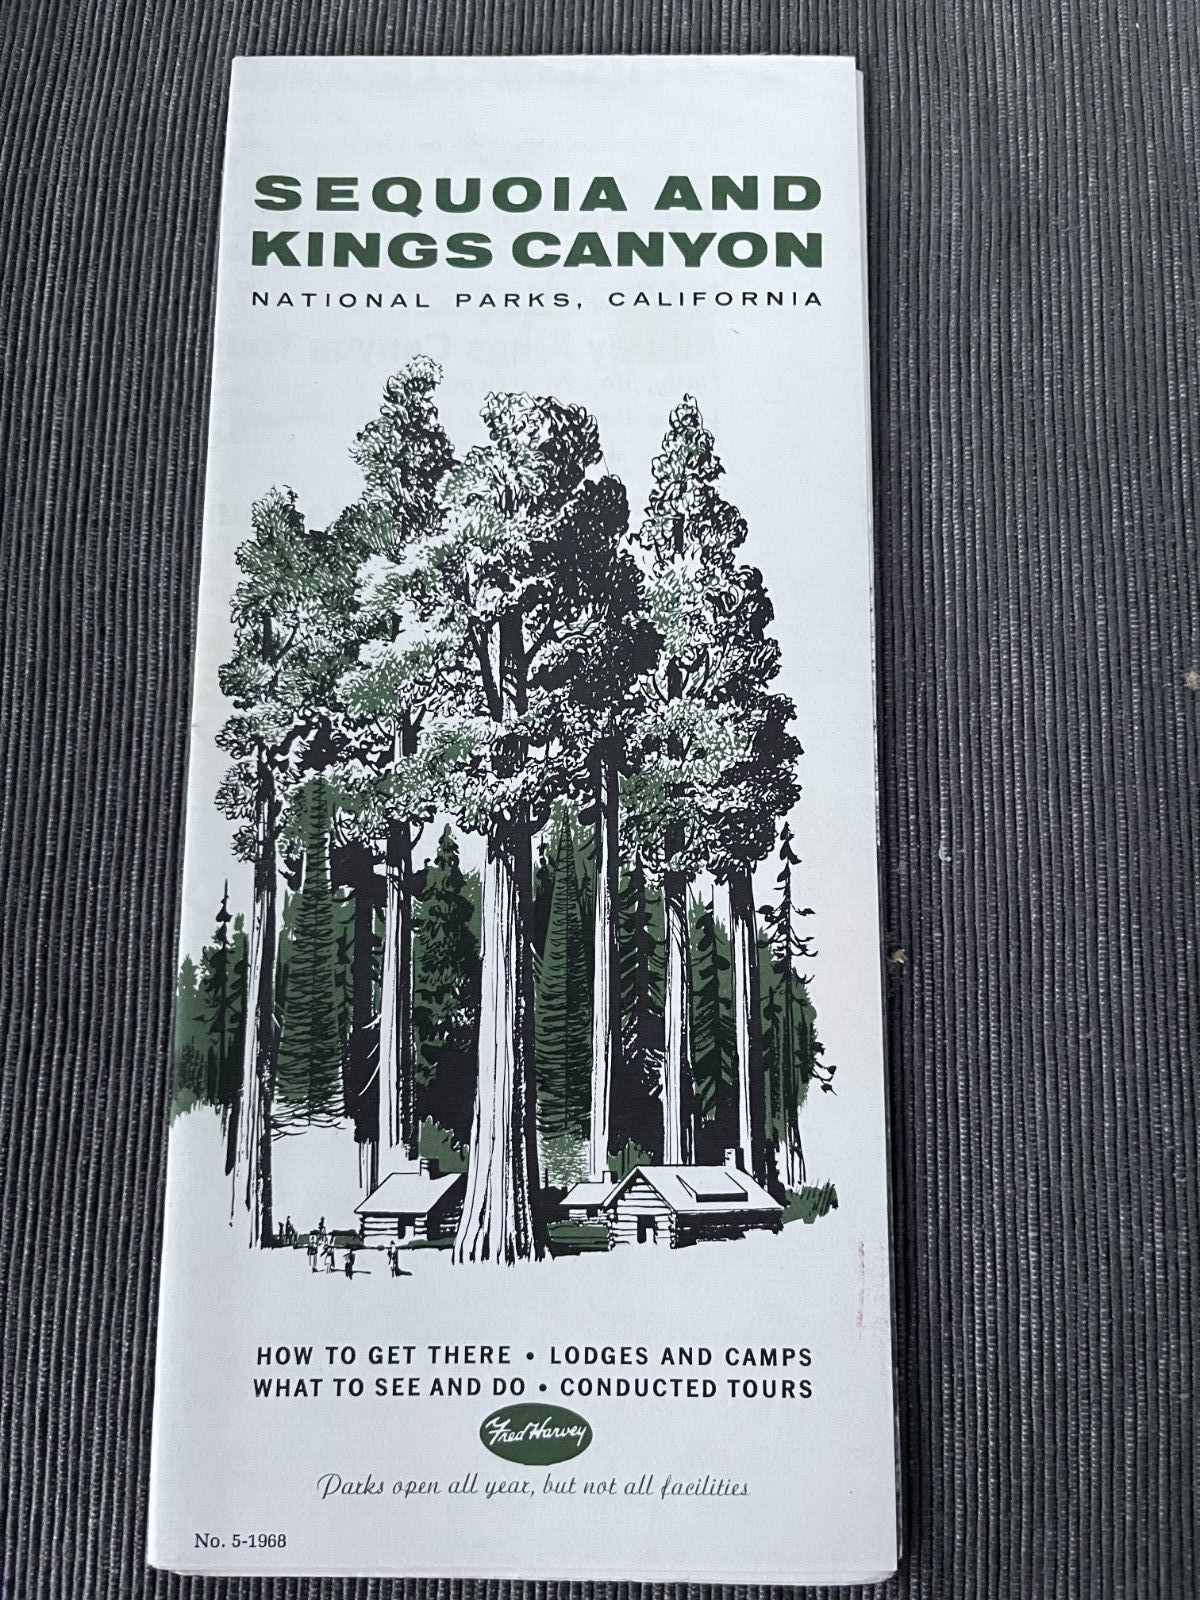 Primary image for Sequoia and Kings Canyon California Fred Harvey brochure 1960s